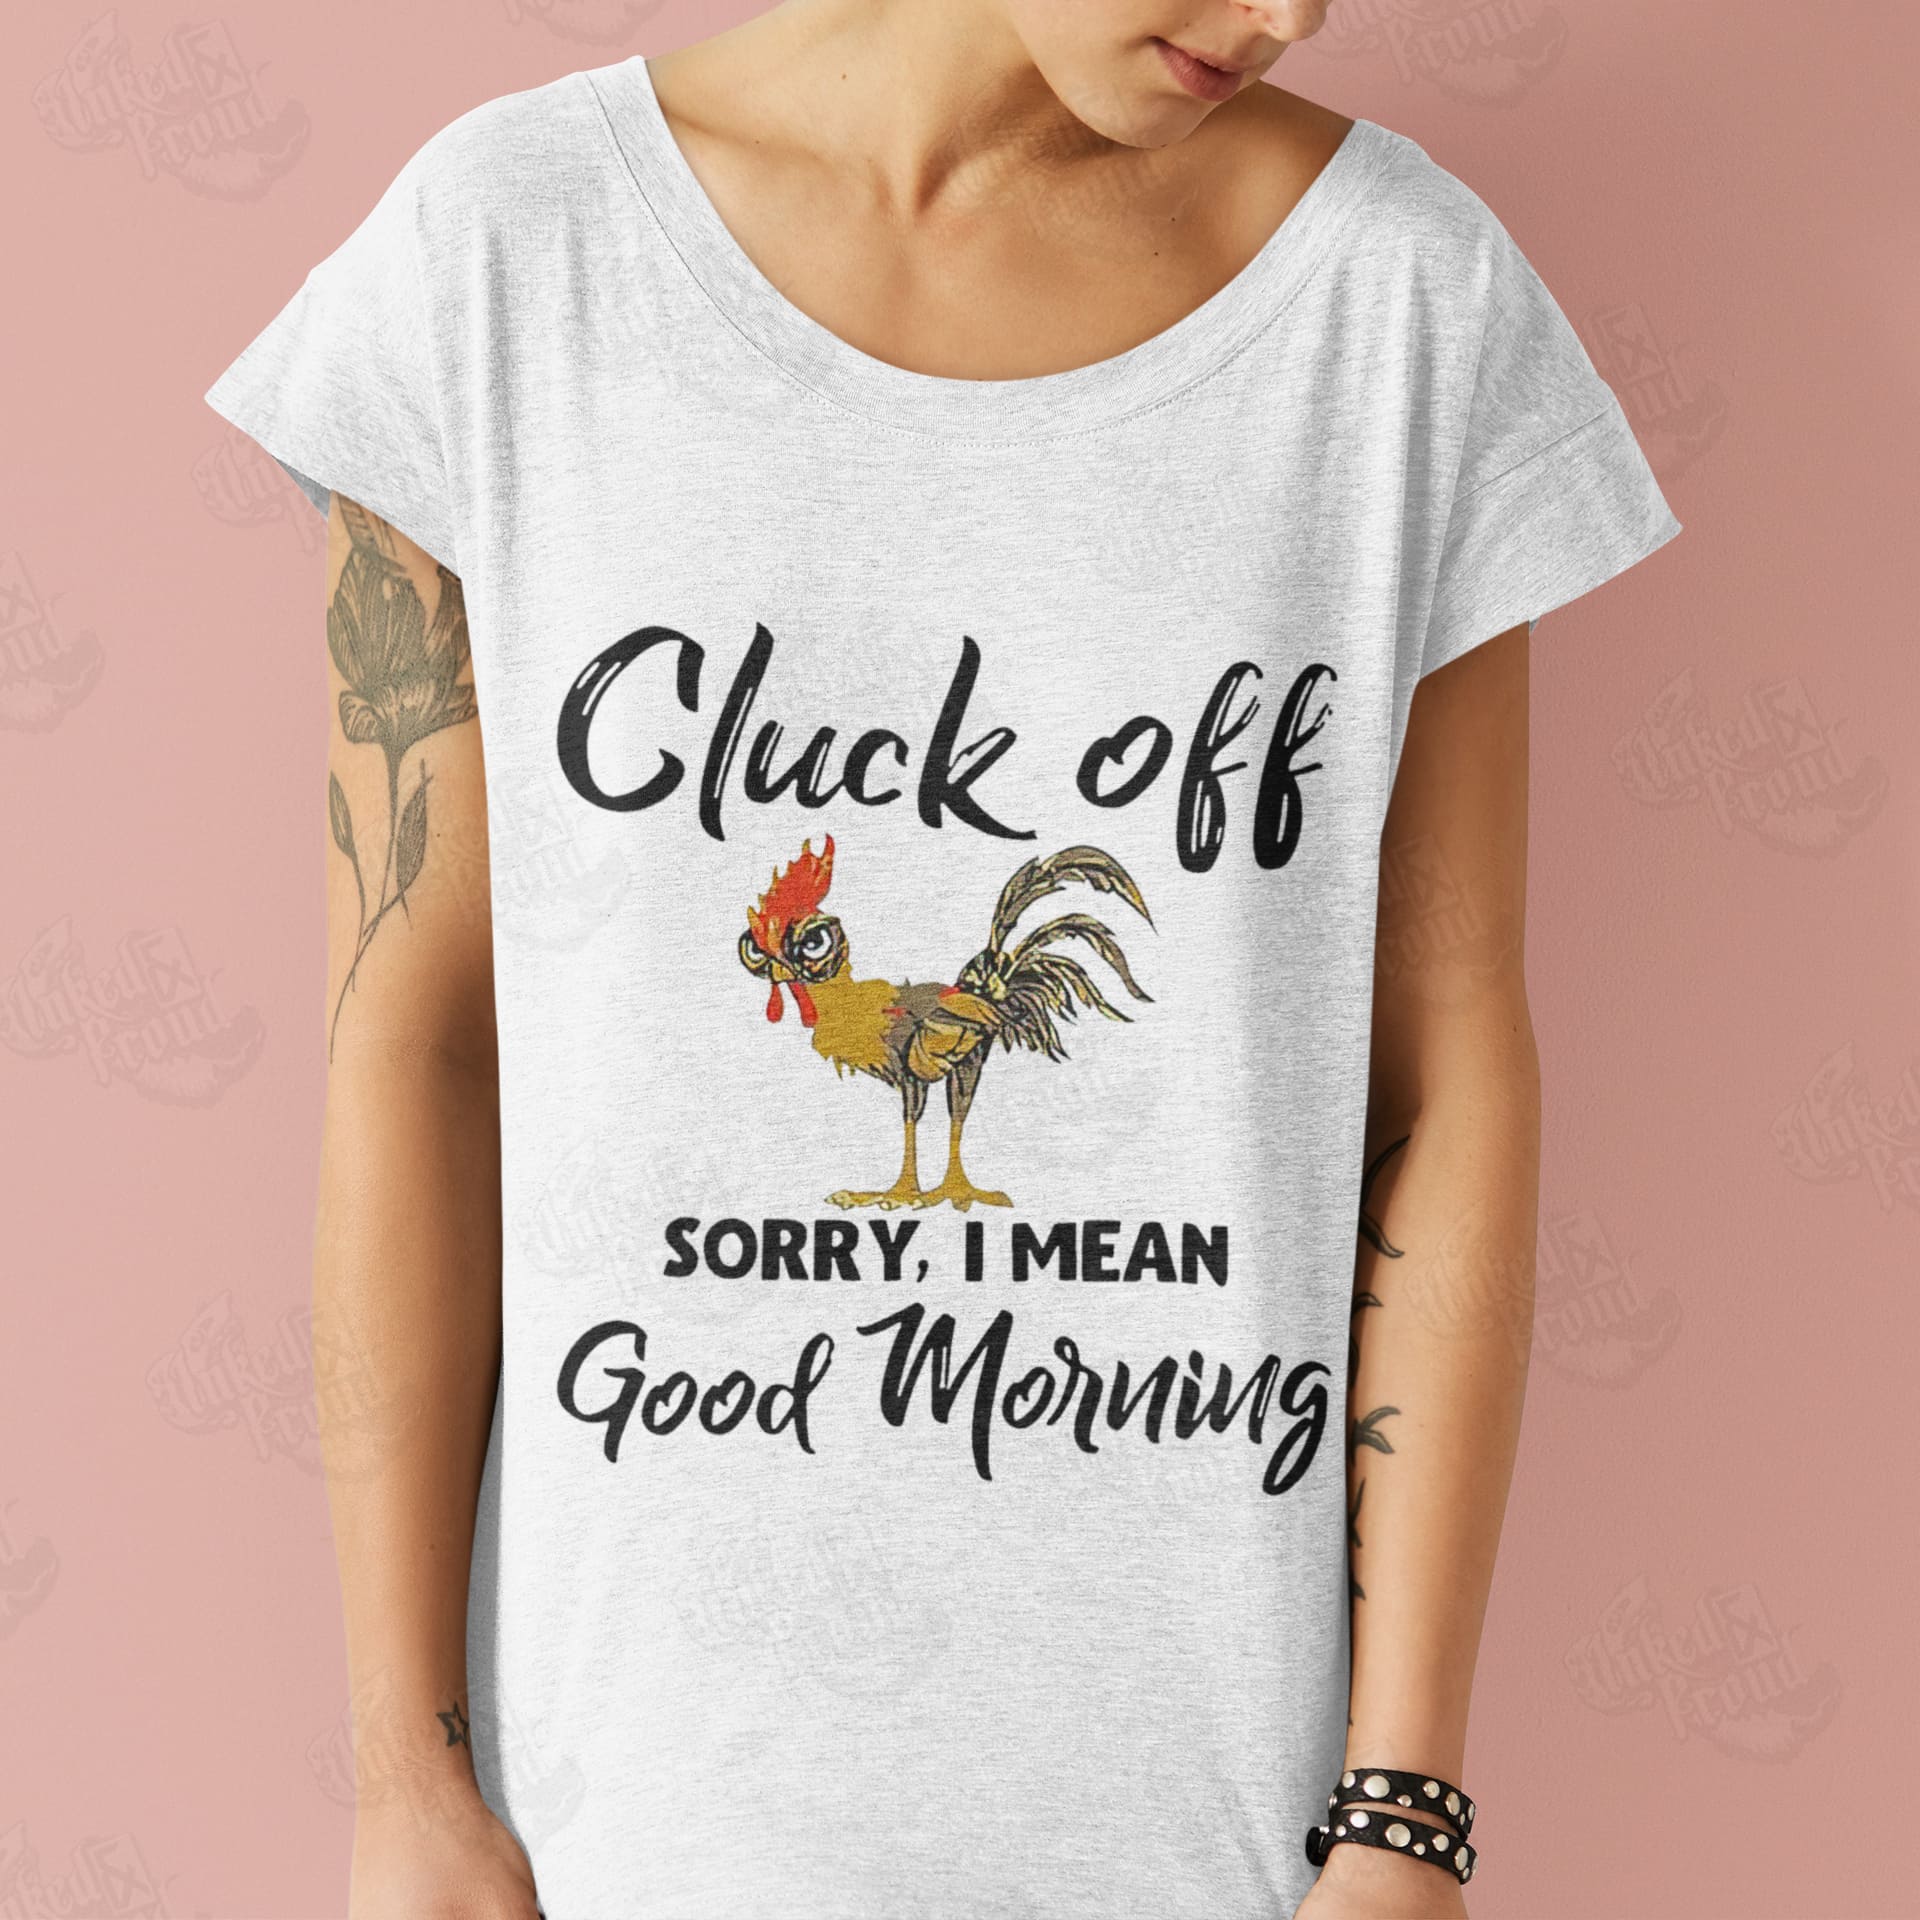 Cluck off - Good morning, Grumpy chicken T-shirt, gift for chicken person